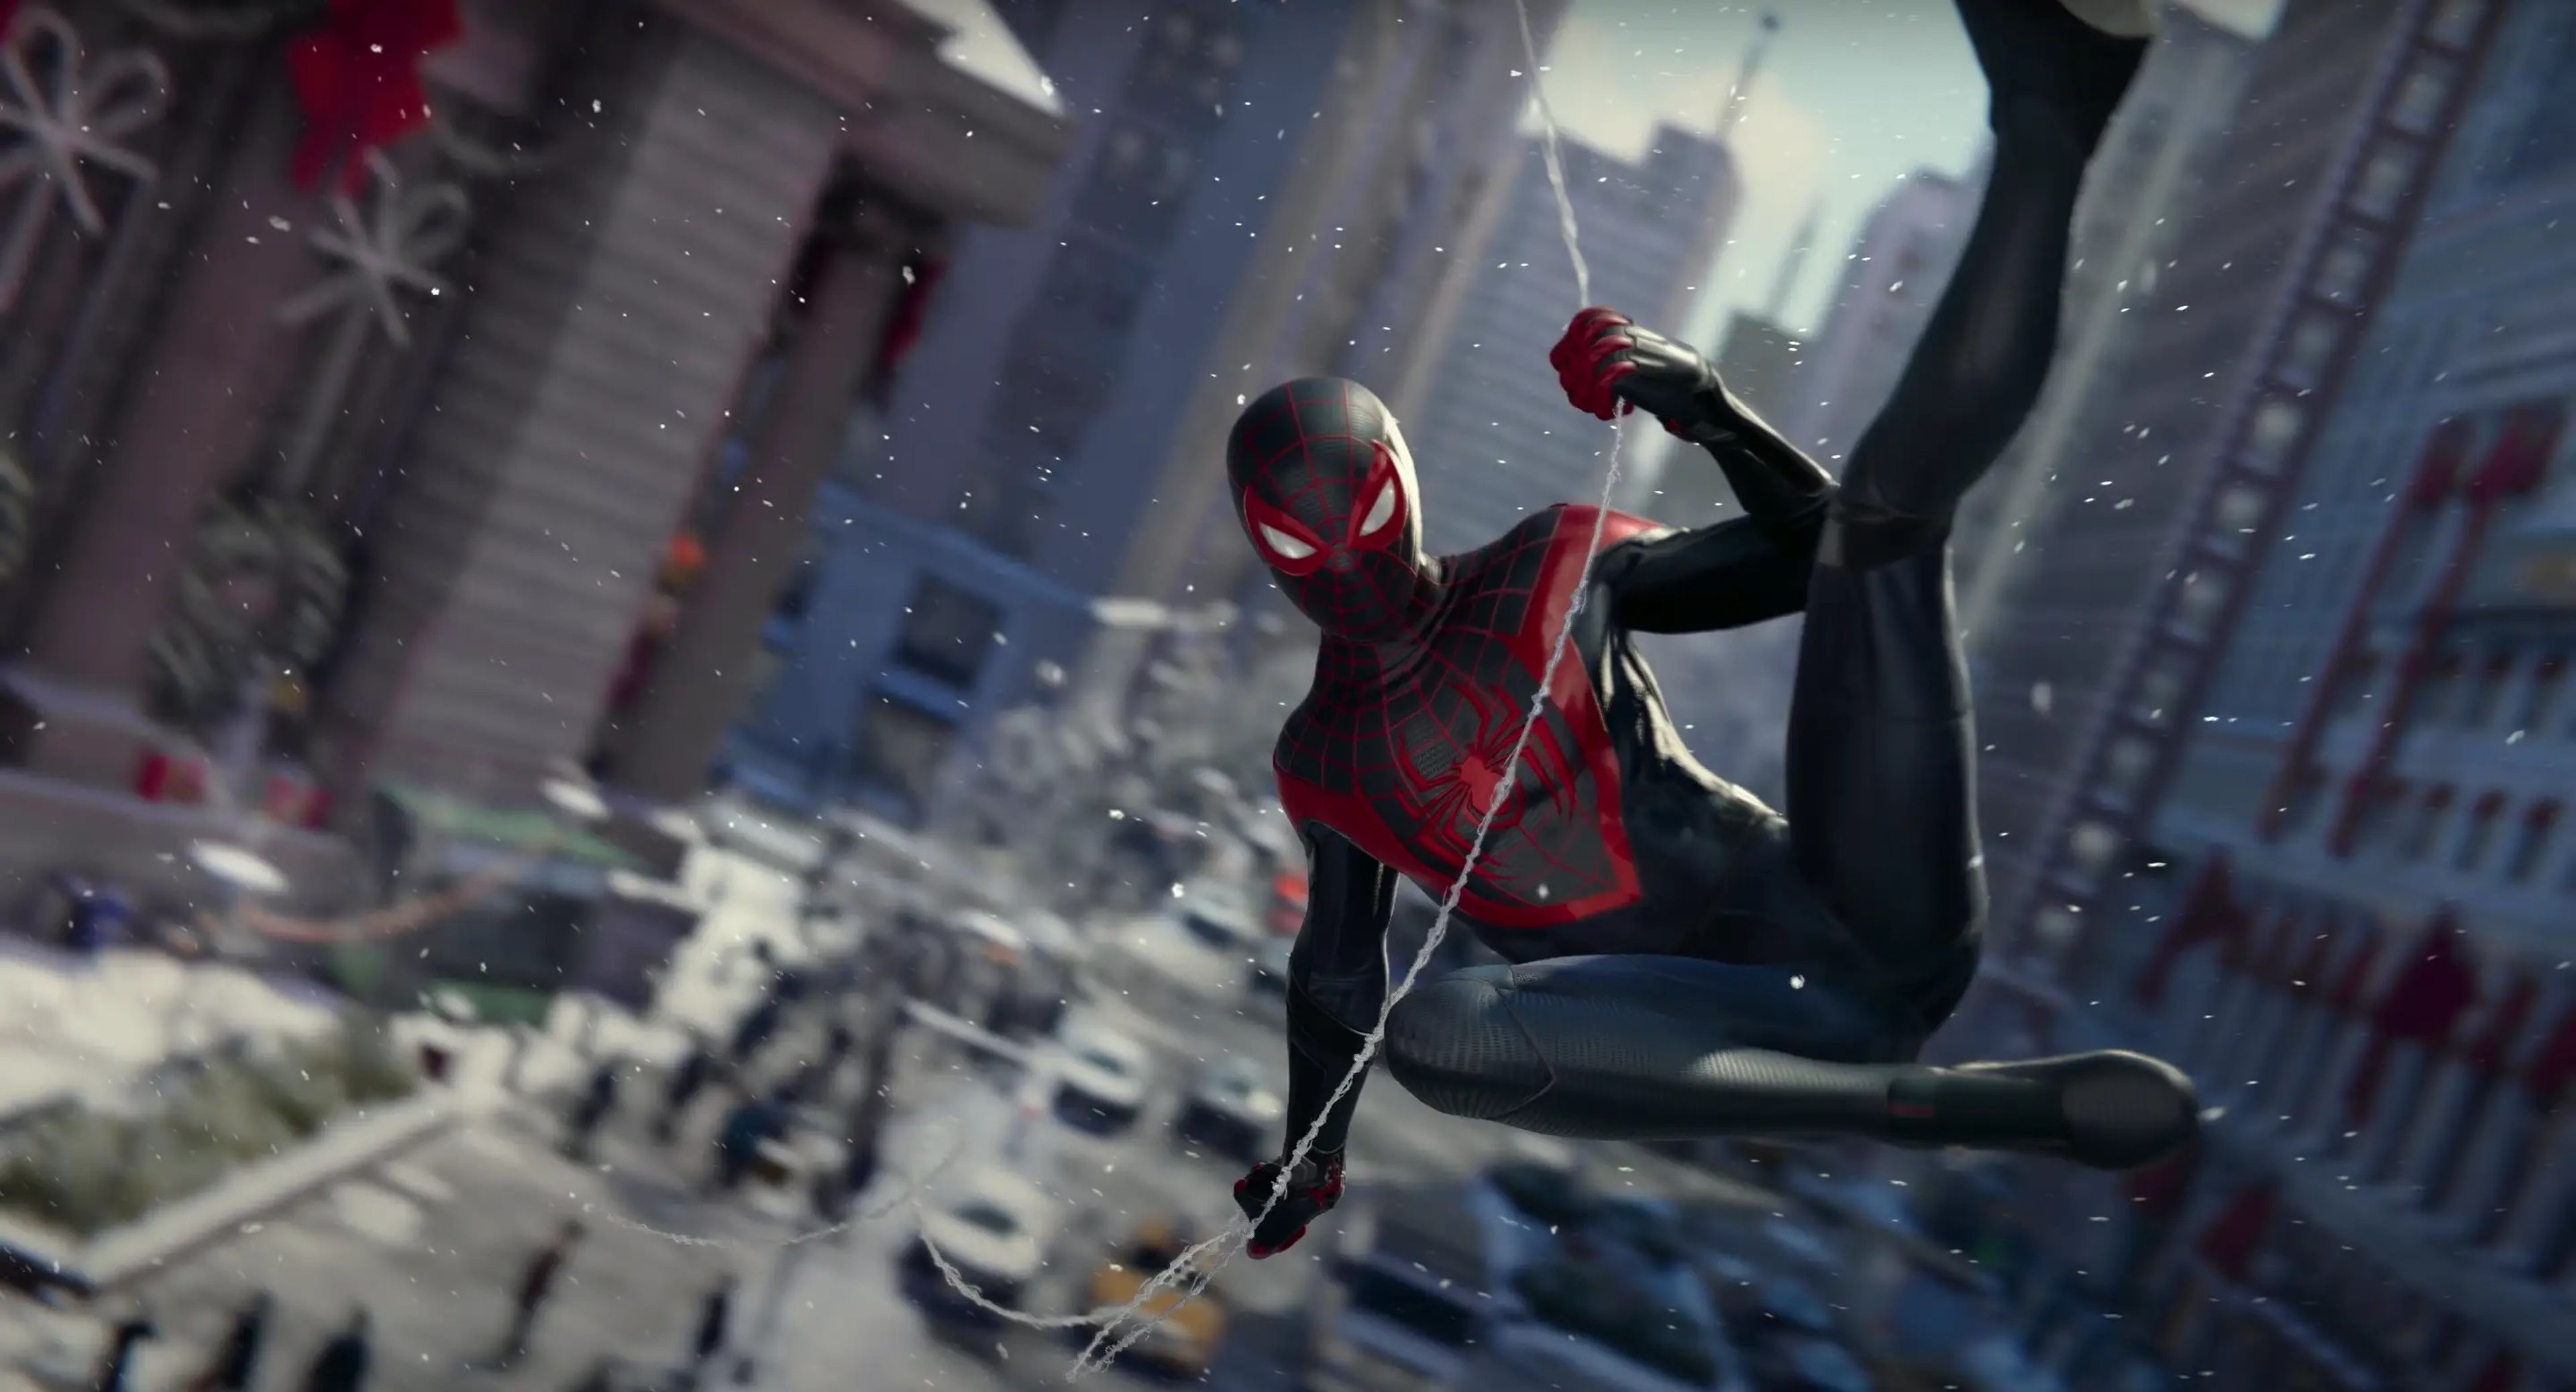 "Marvel's Spider-Man: Miles Morales" is the most recent entry in the PlayStation-exclusive game series.